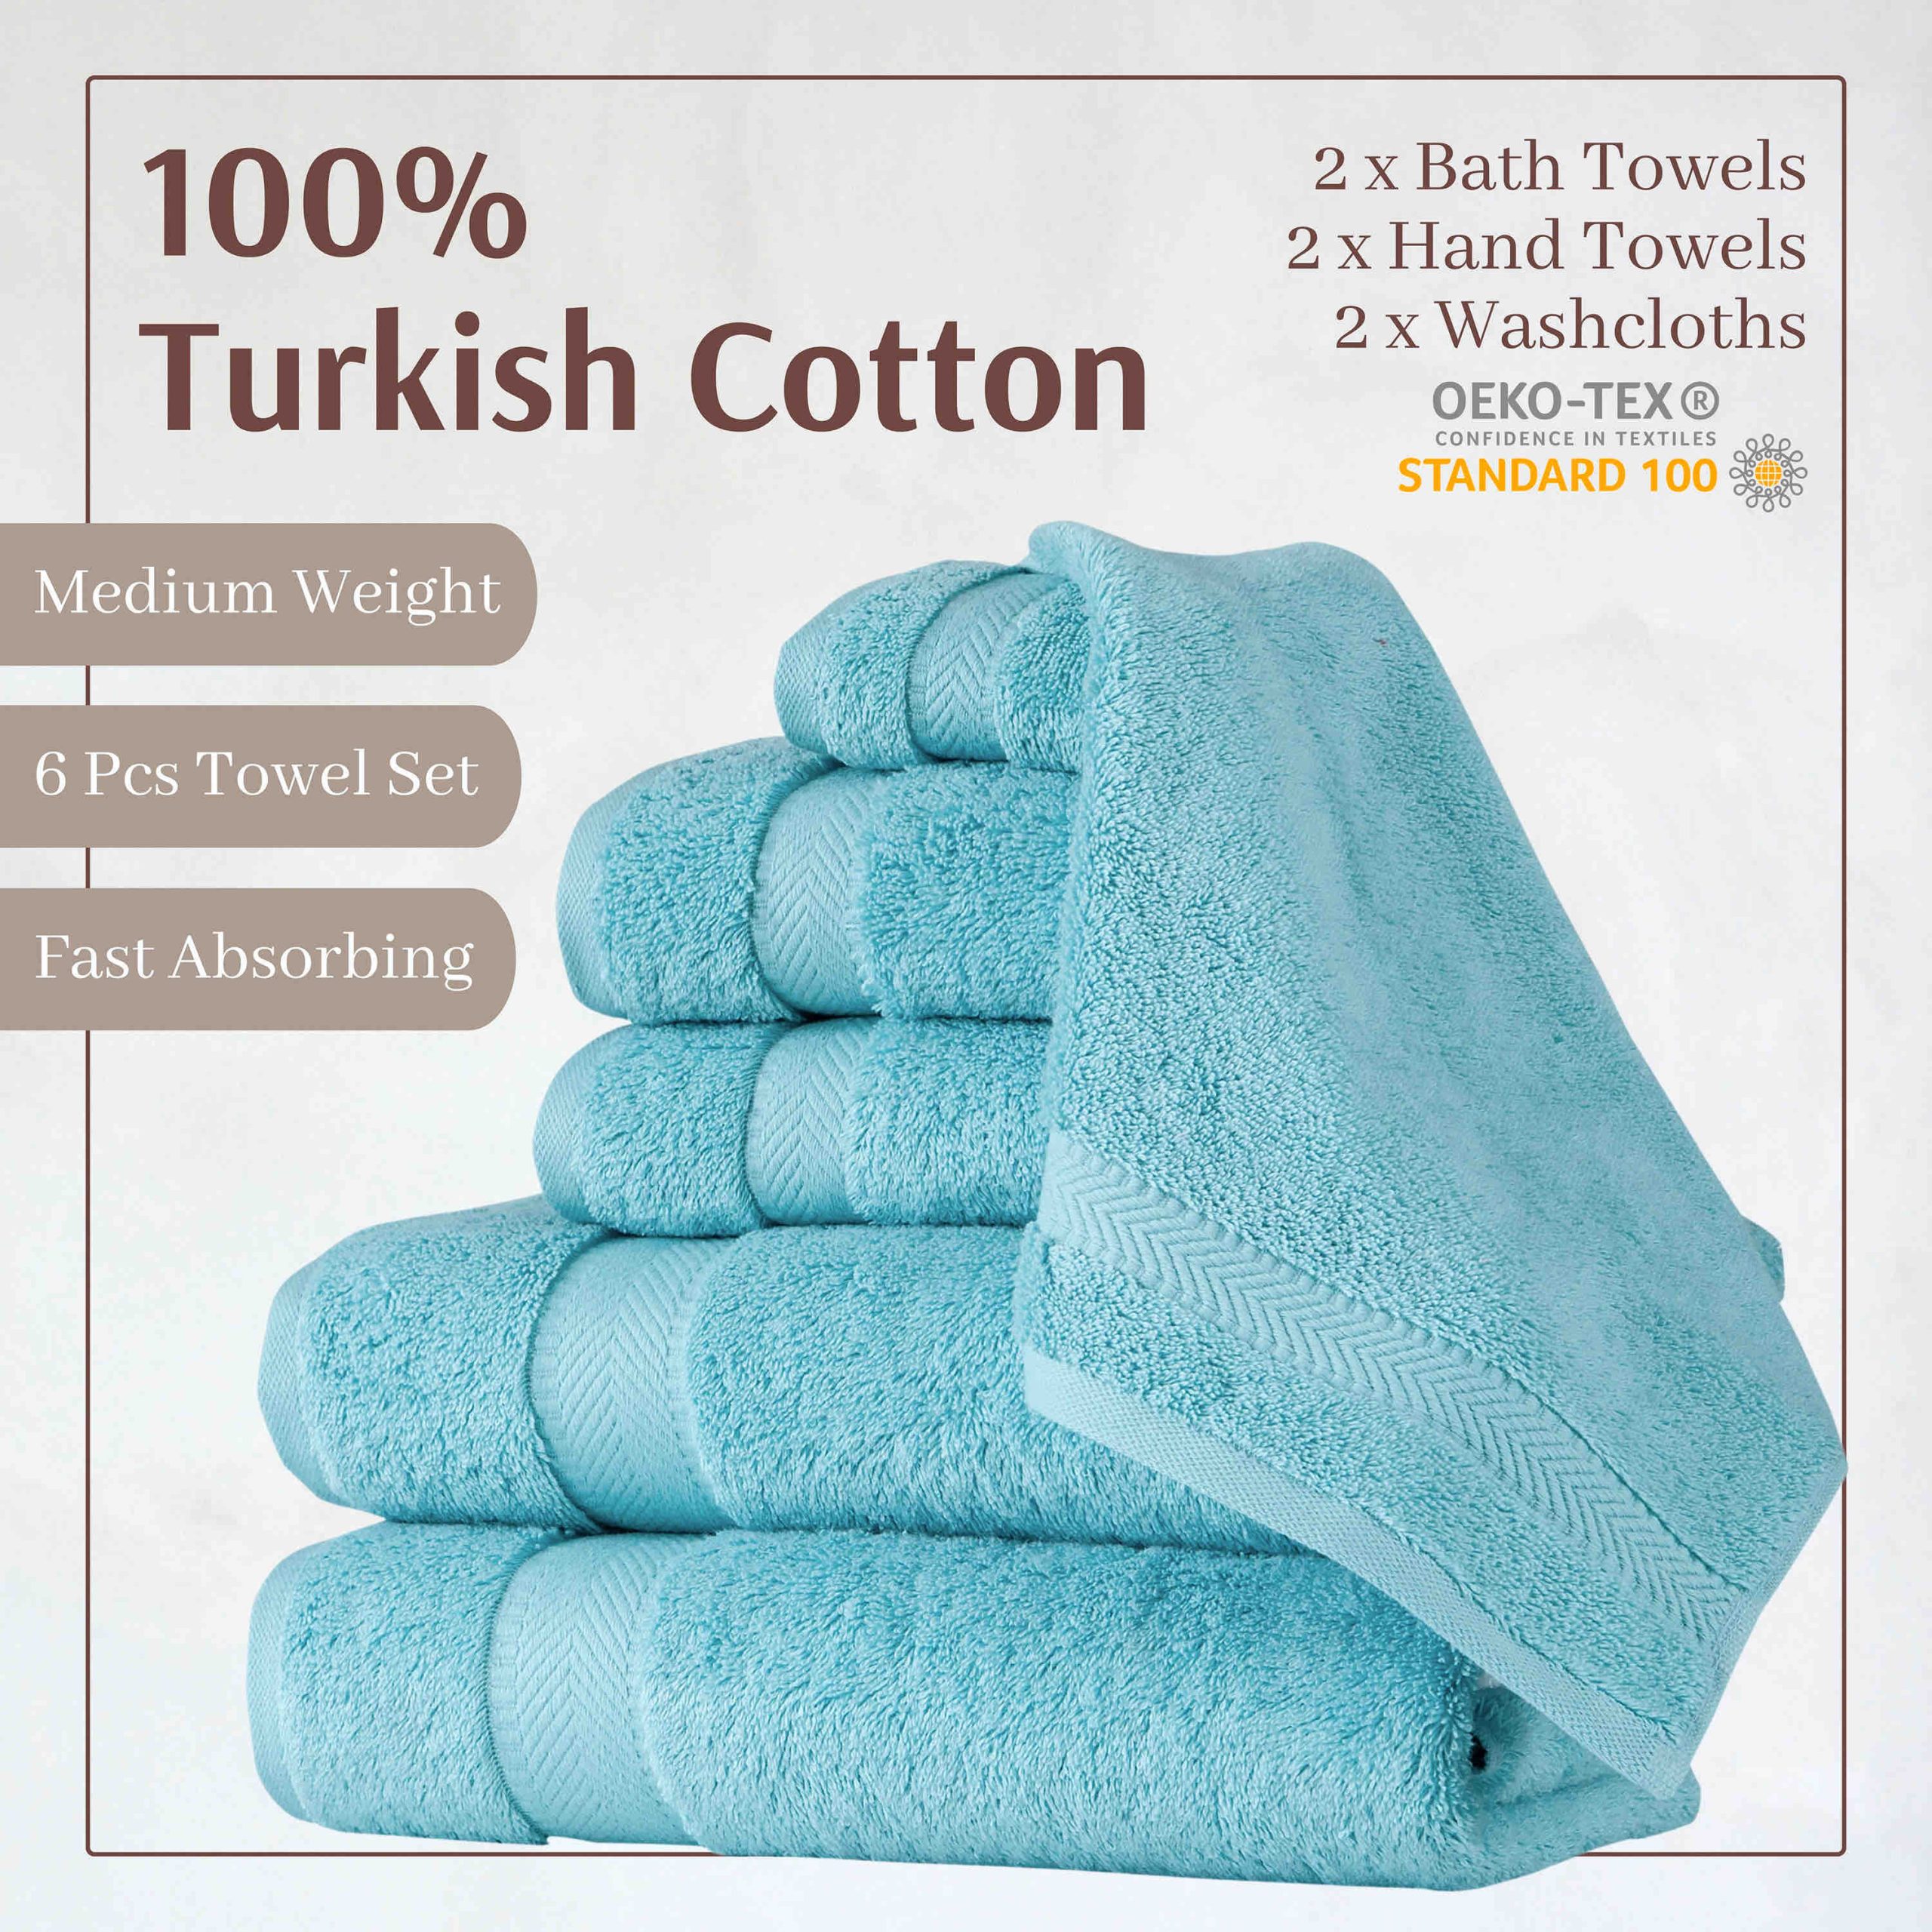 Elegant Comfort Cotton 6-Piece Towel Set, Includes 2 Washcloths, 2 Hand Towels and 2 Bath Towels, 100% Turkish Cotton - Highly Absorbent and Super